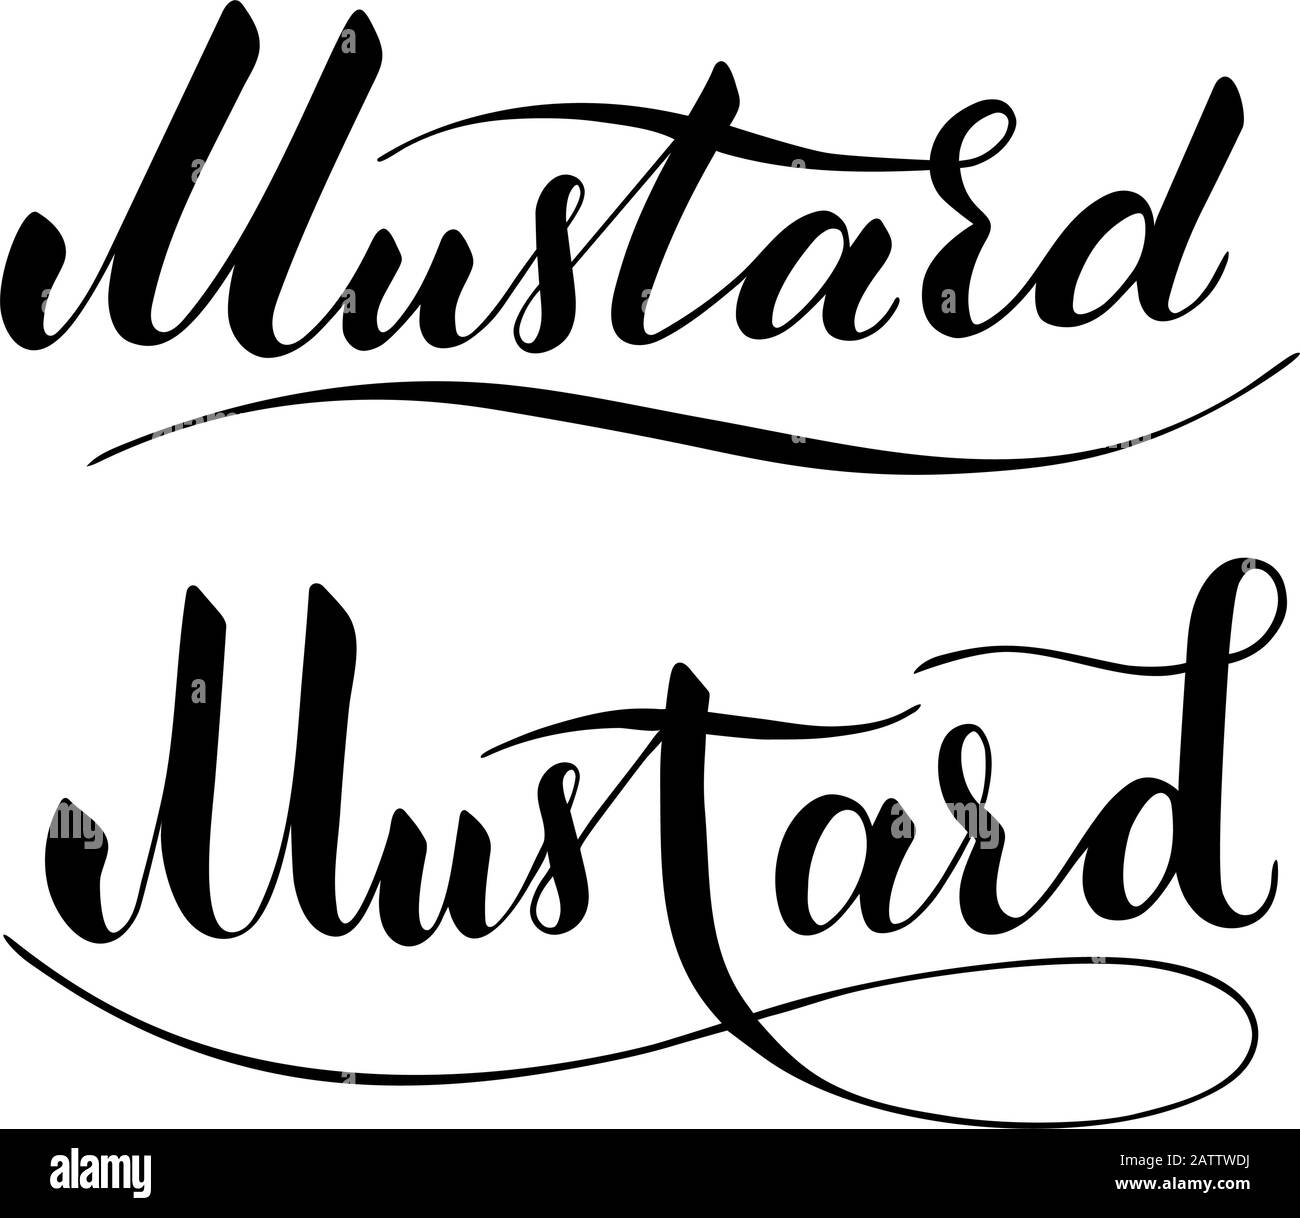 Vector hand written mustard text isolated on white background. Kitchen healthy herbs and spices for cooking. Script brushpen lettering with flourishes Stock Vector